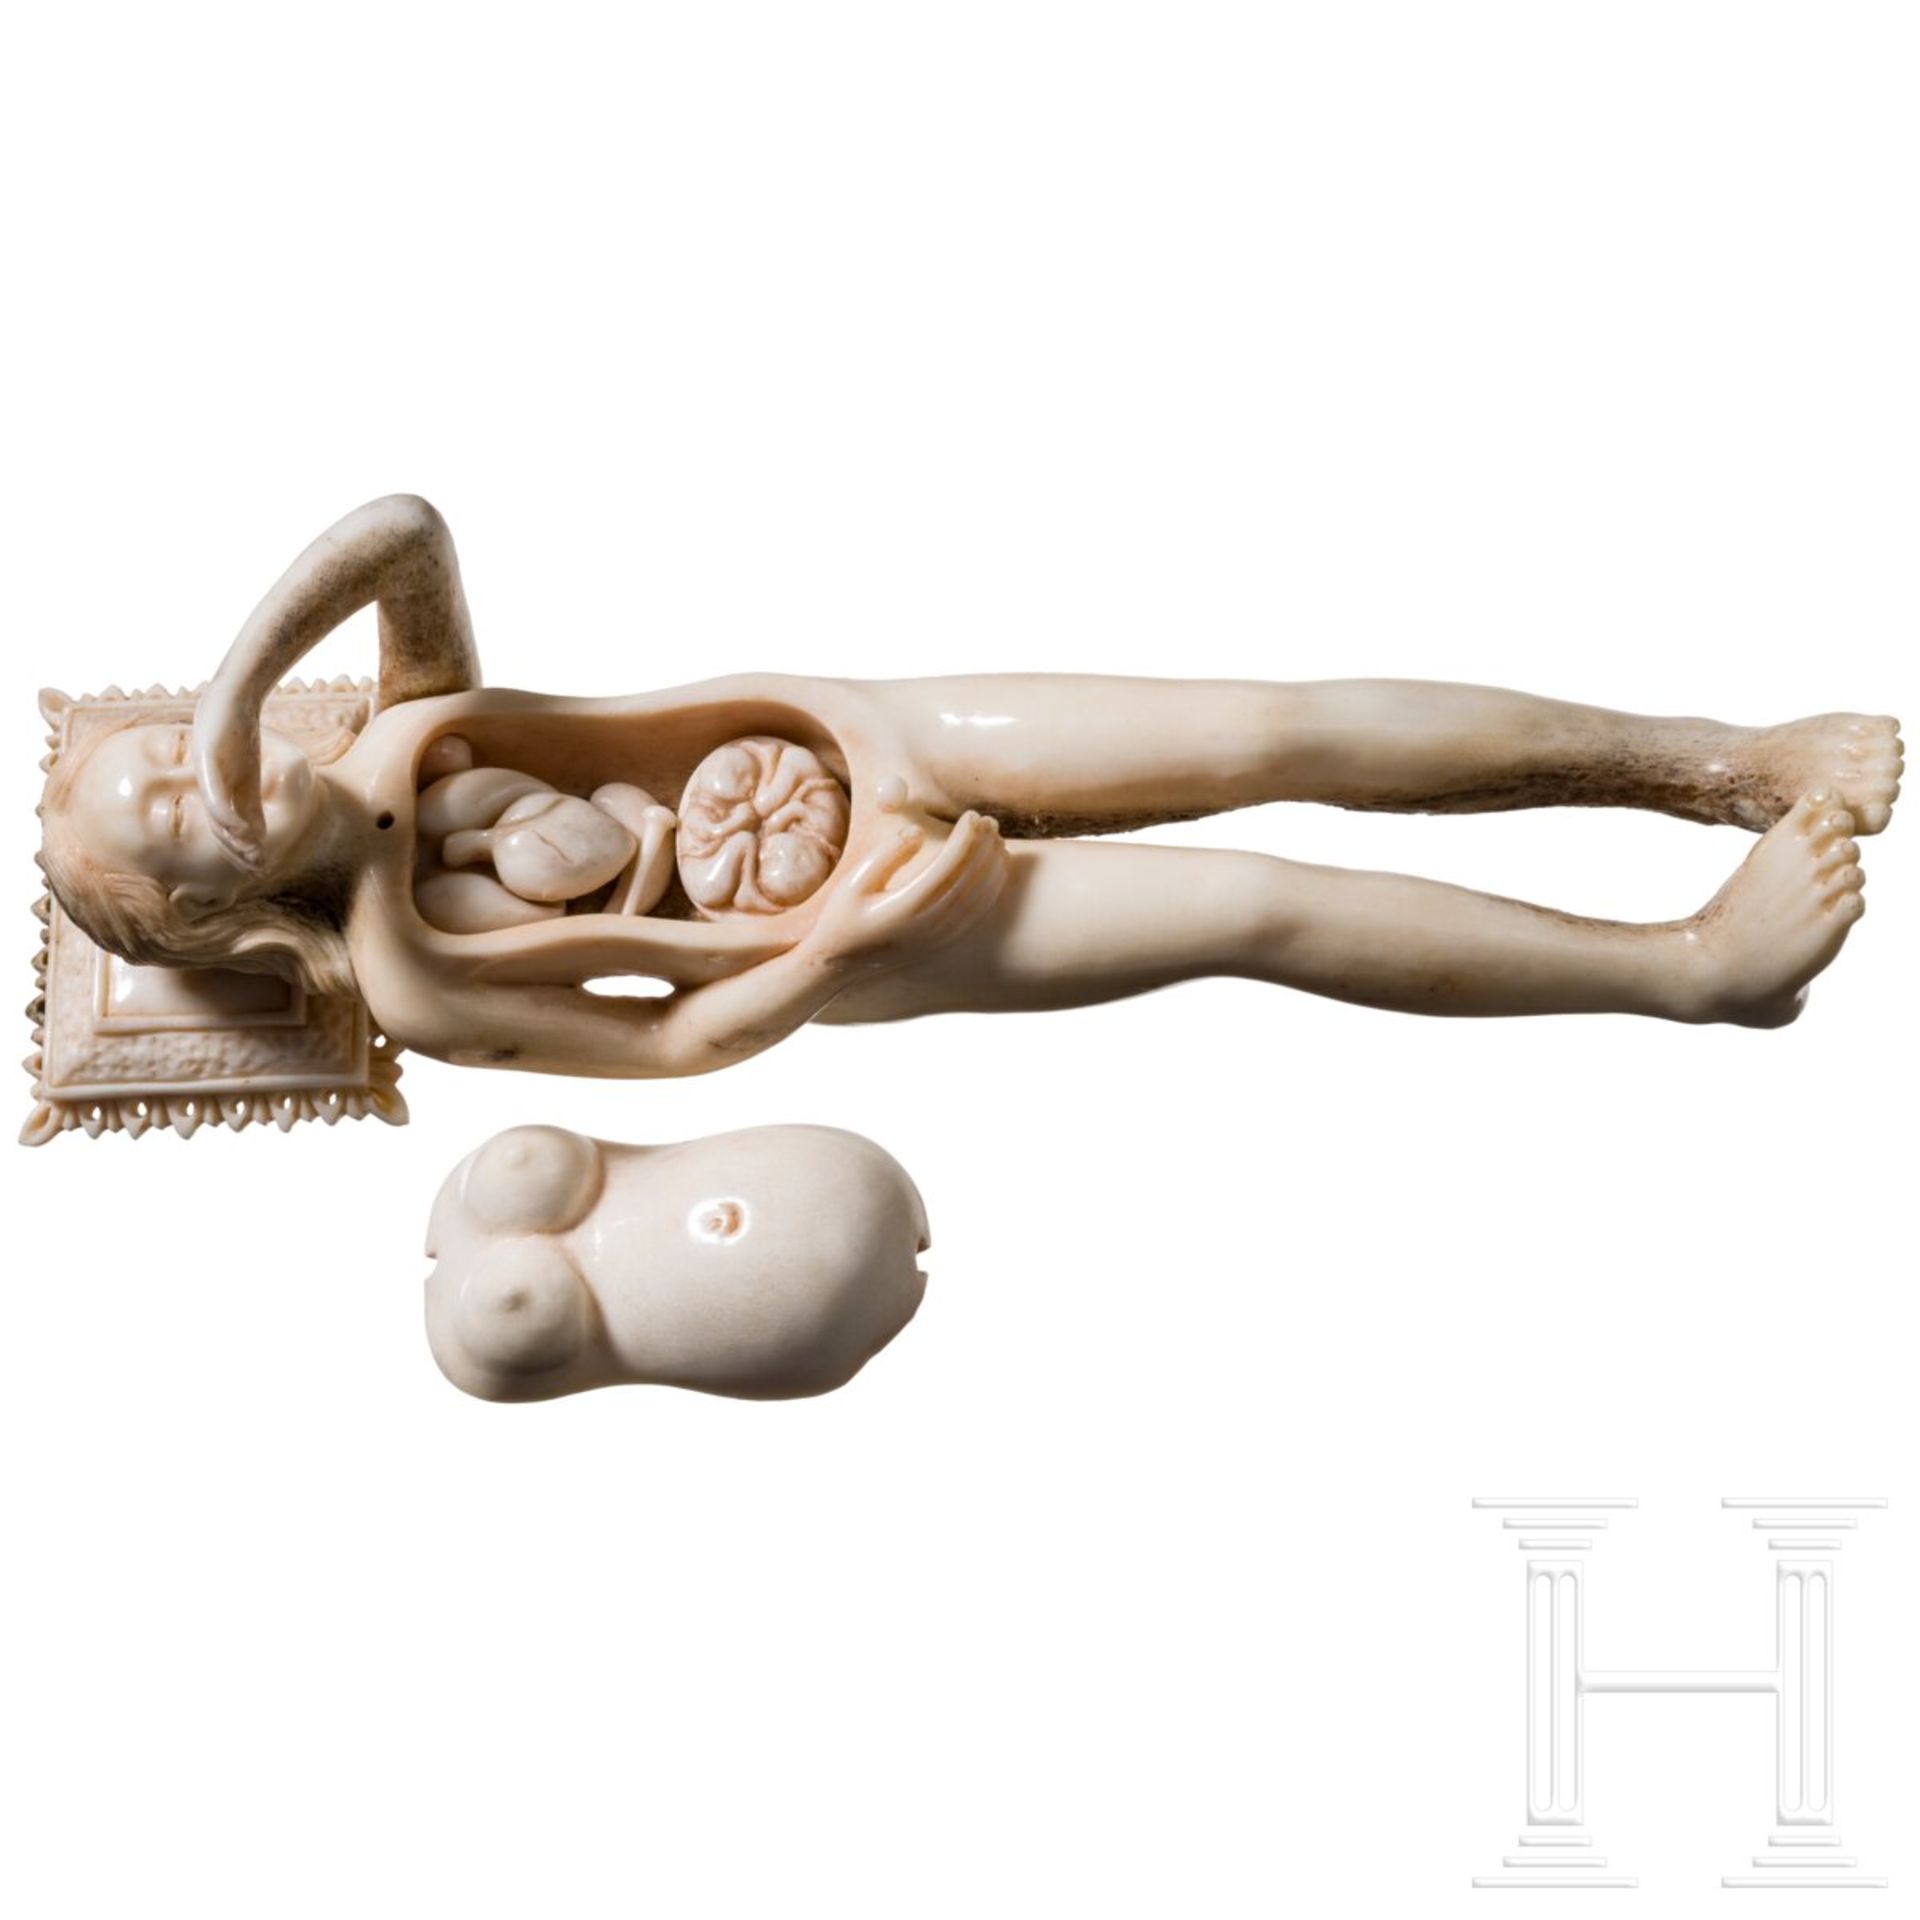 Anatomisches Modell (Doctor's Lady) im Stil des 17. Jhdts., wohl Goa, 19. Jhdt. - Image 2 of 5